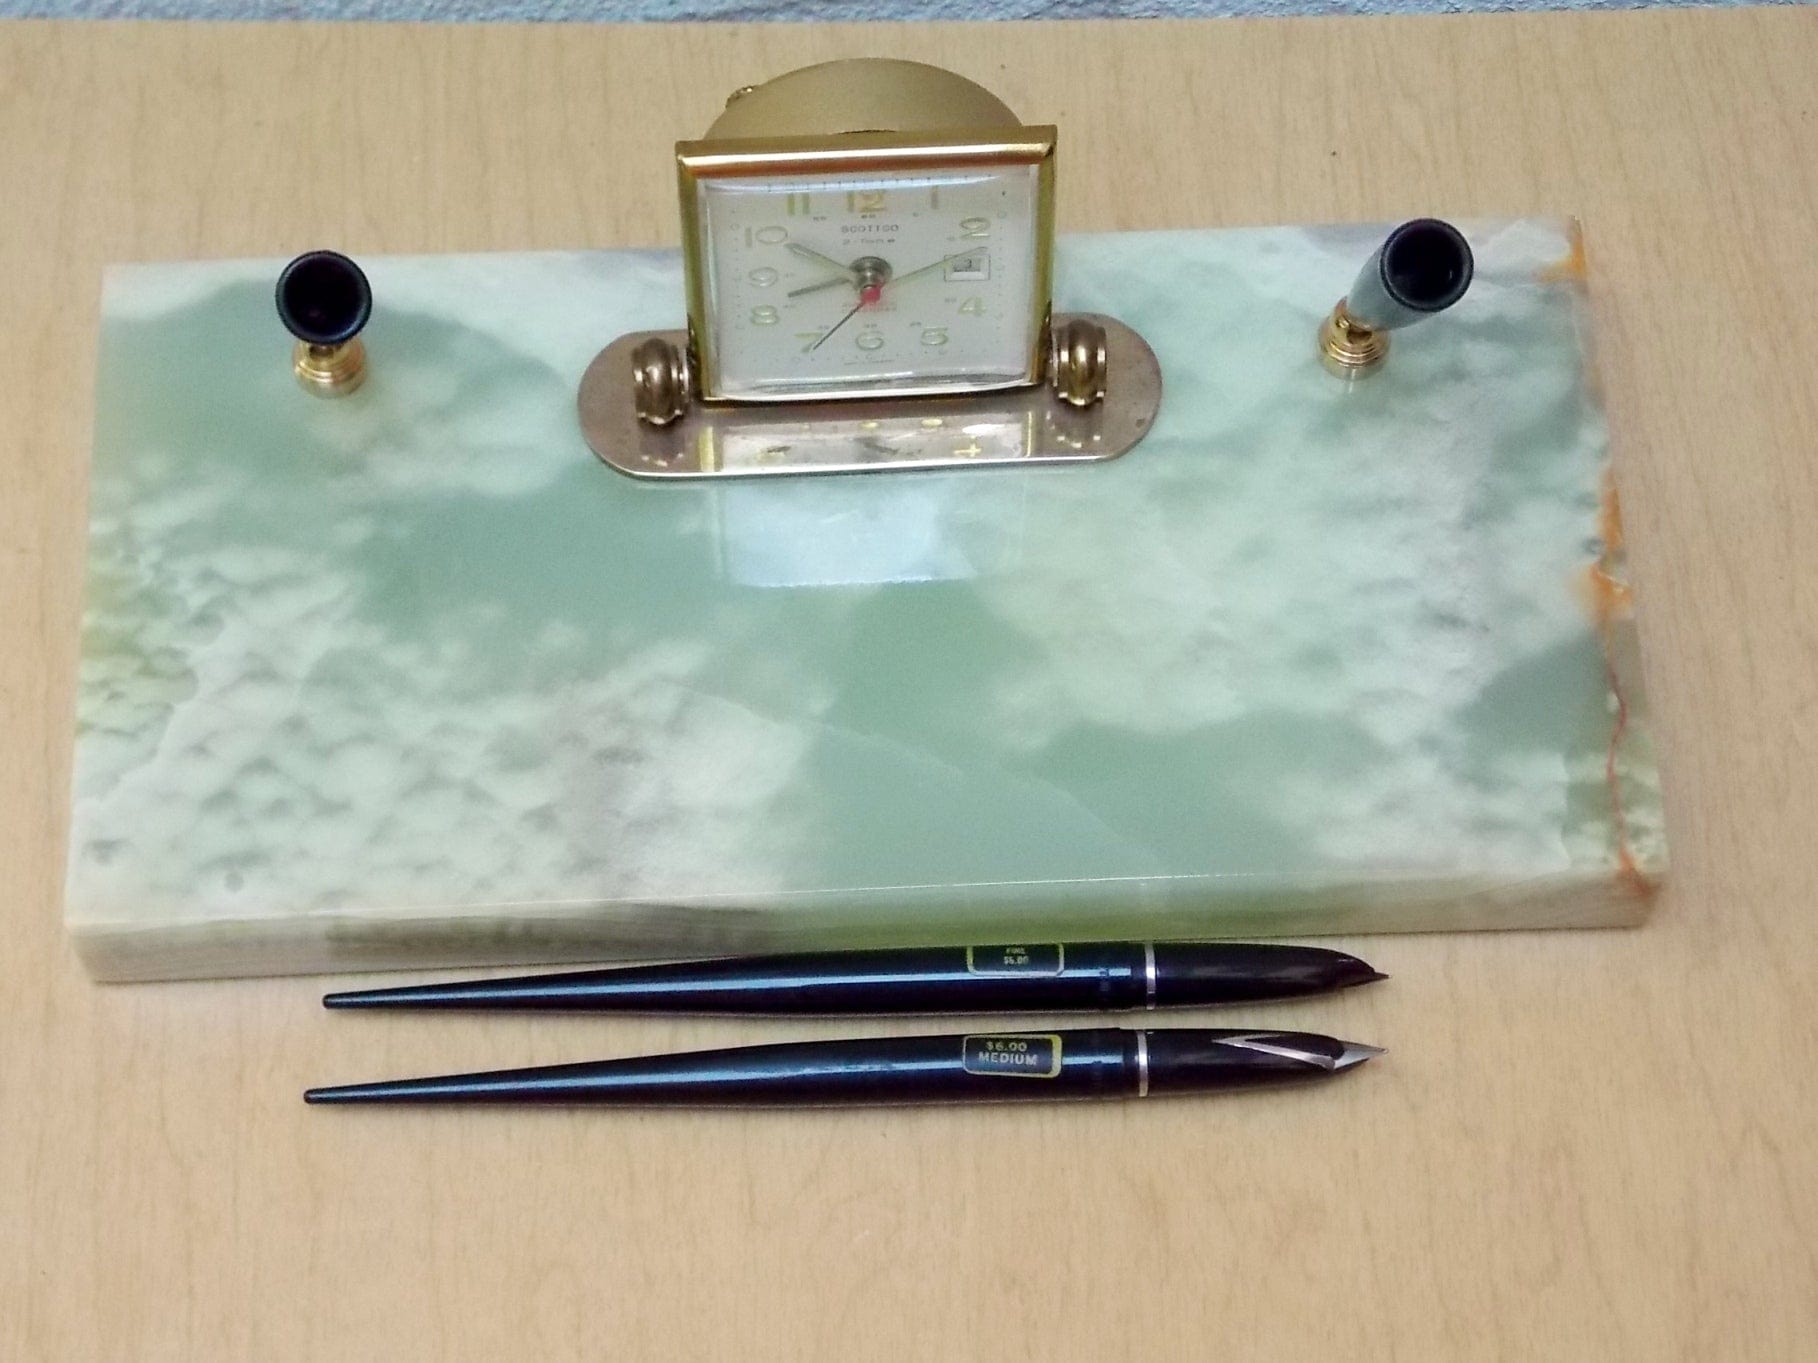 I Like Mike's Mid Century Modern Accessories Scottco Green Marble Desk Clock Two-Pen Pen Set